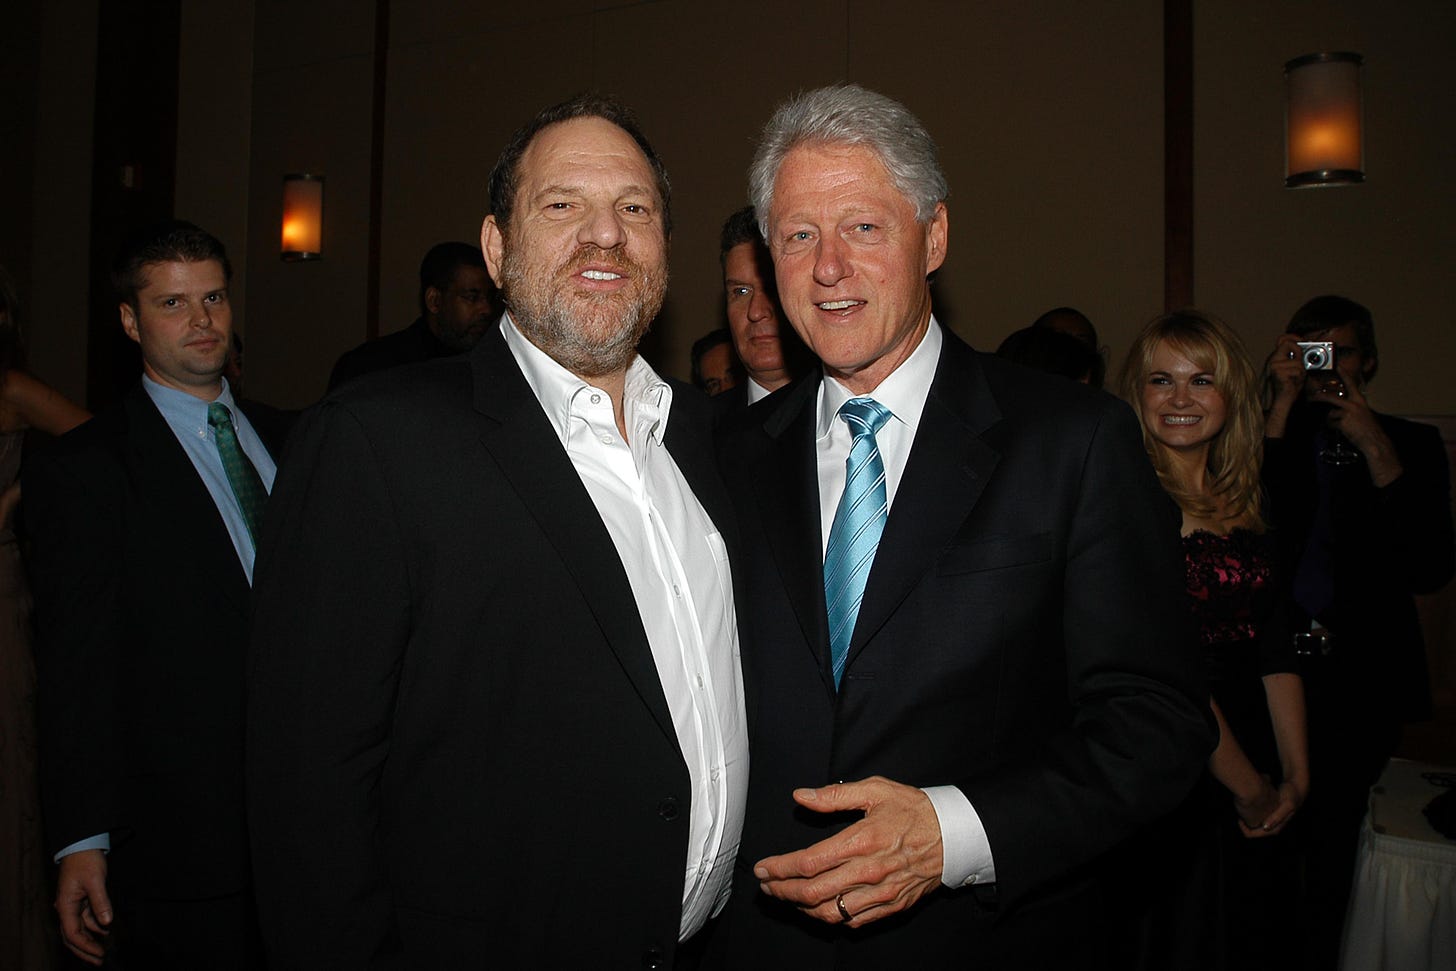 Bill Clinton helped Harvey Weinstein with Oscars campaigns: book